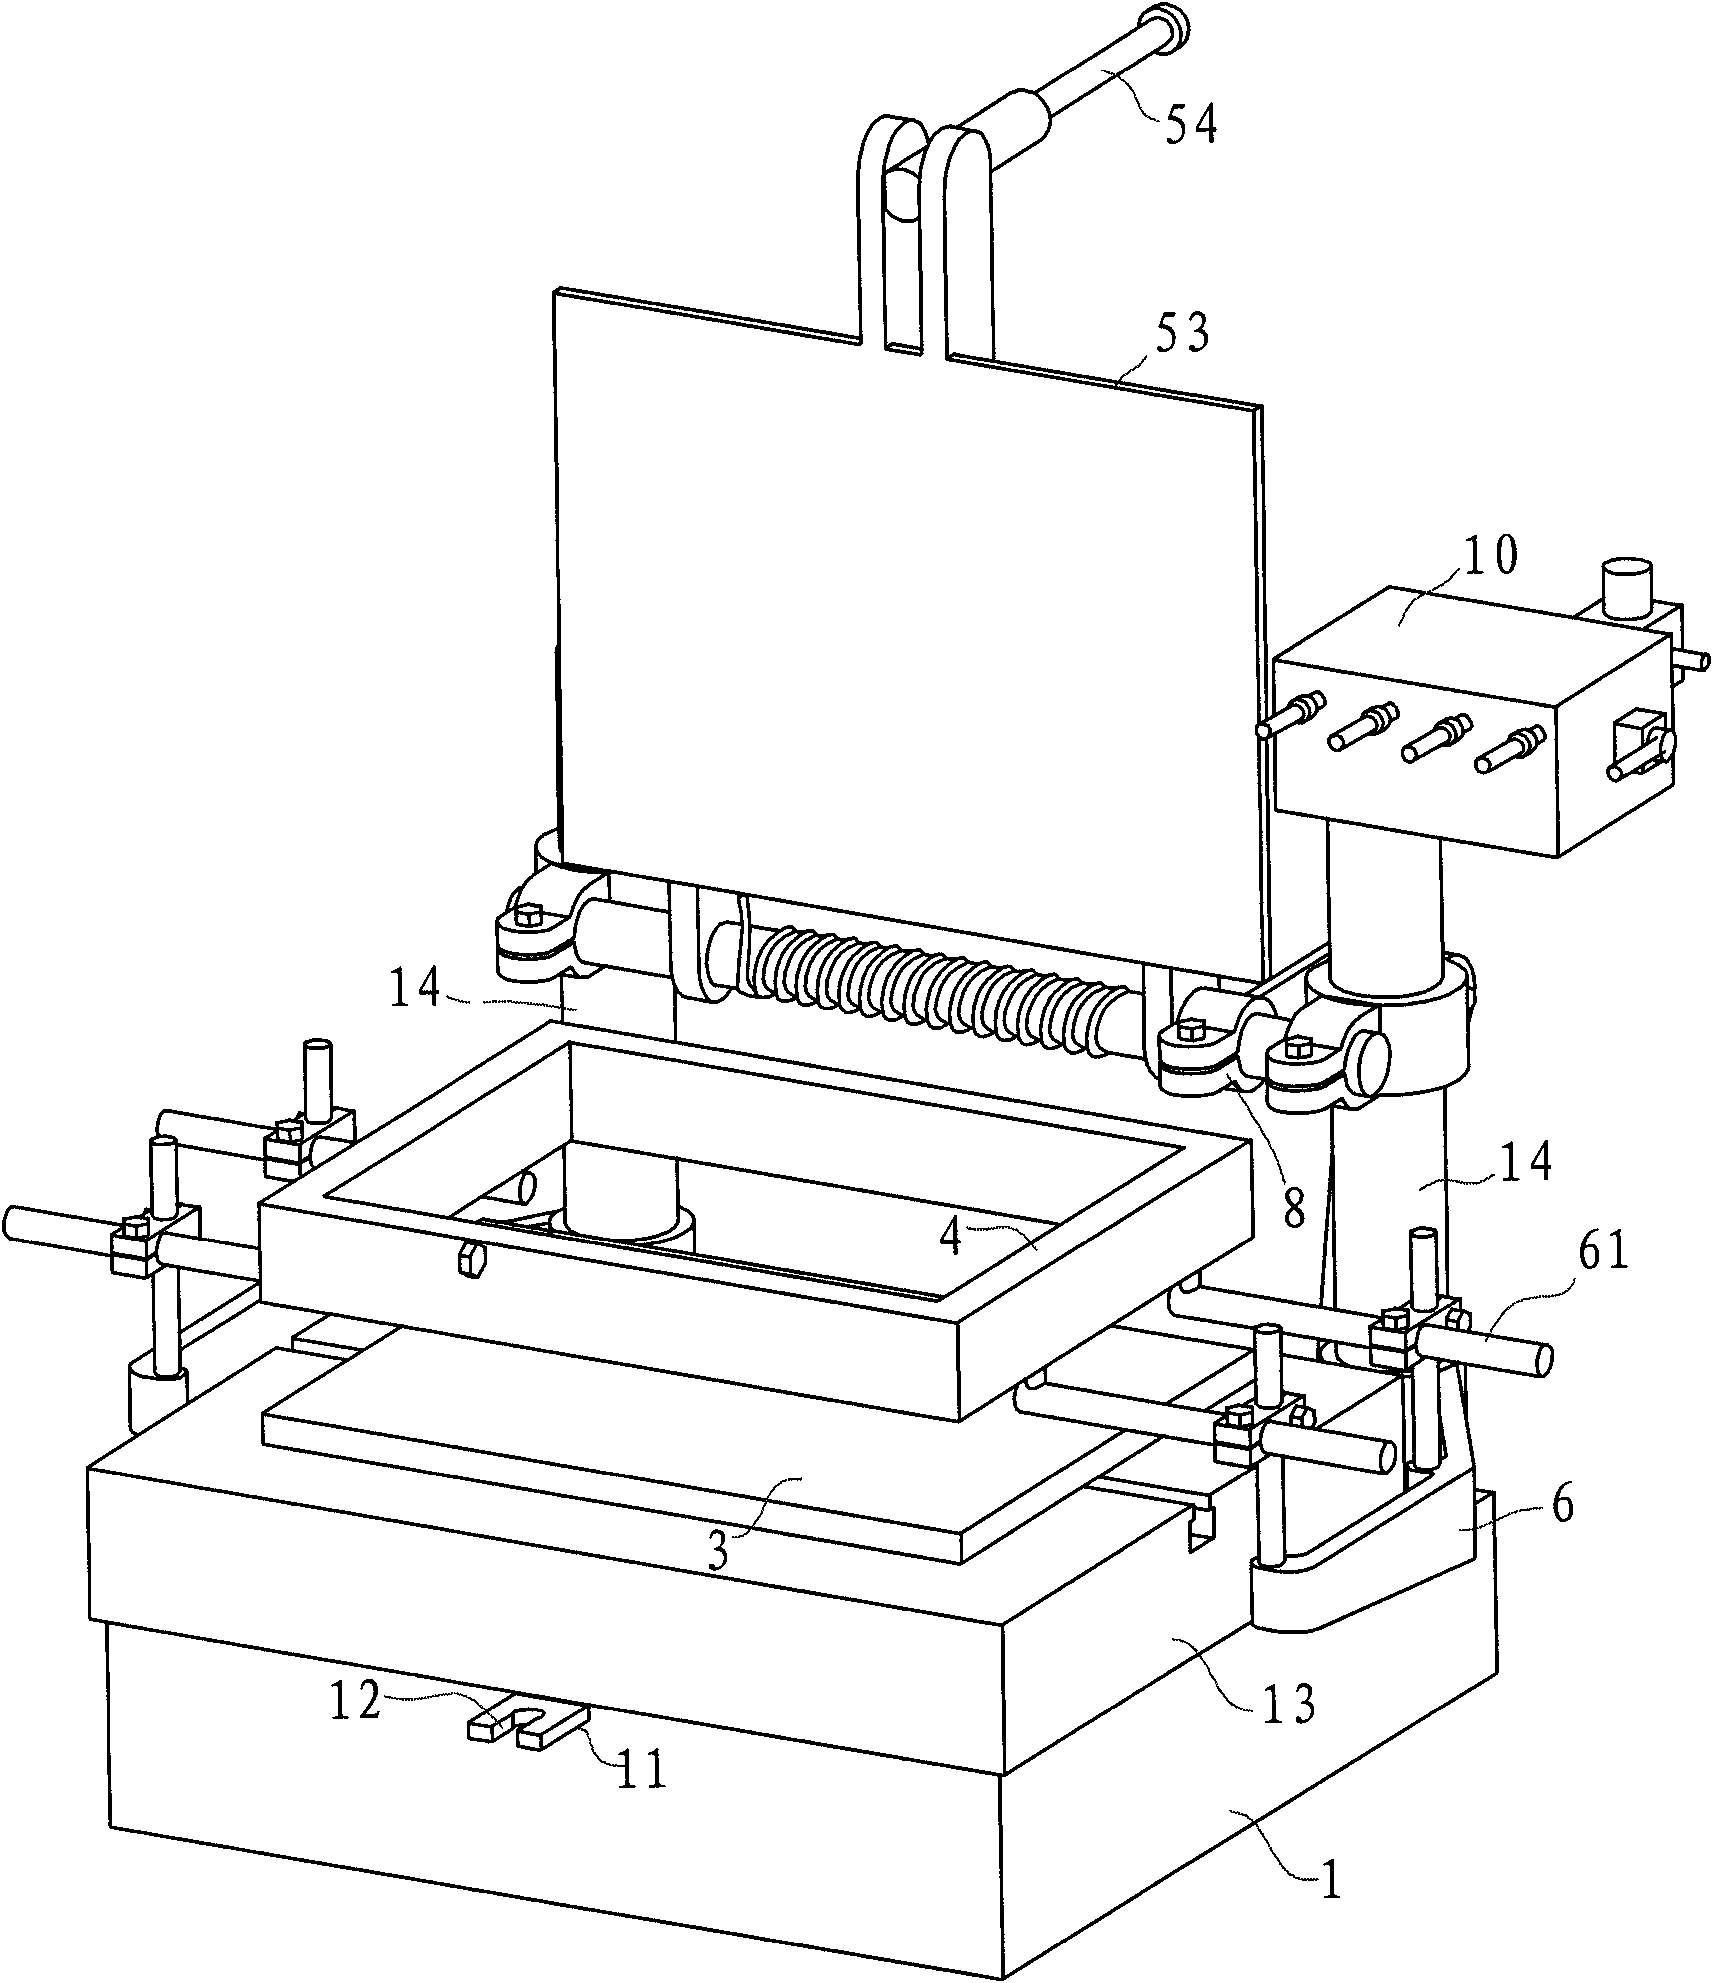 Pattern drawing mechanism for founding moulding and founding moulding machine using the pattern drawing mechanism